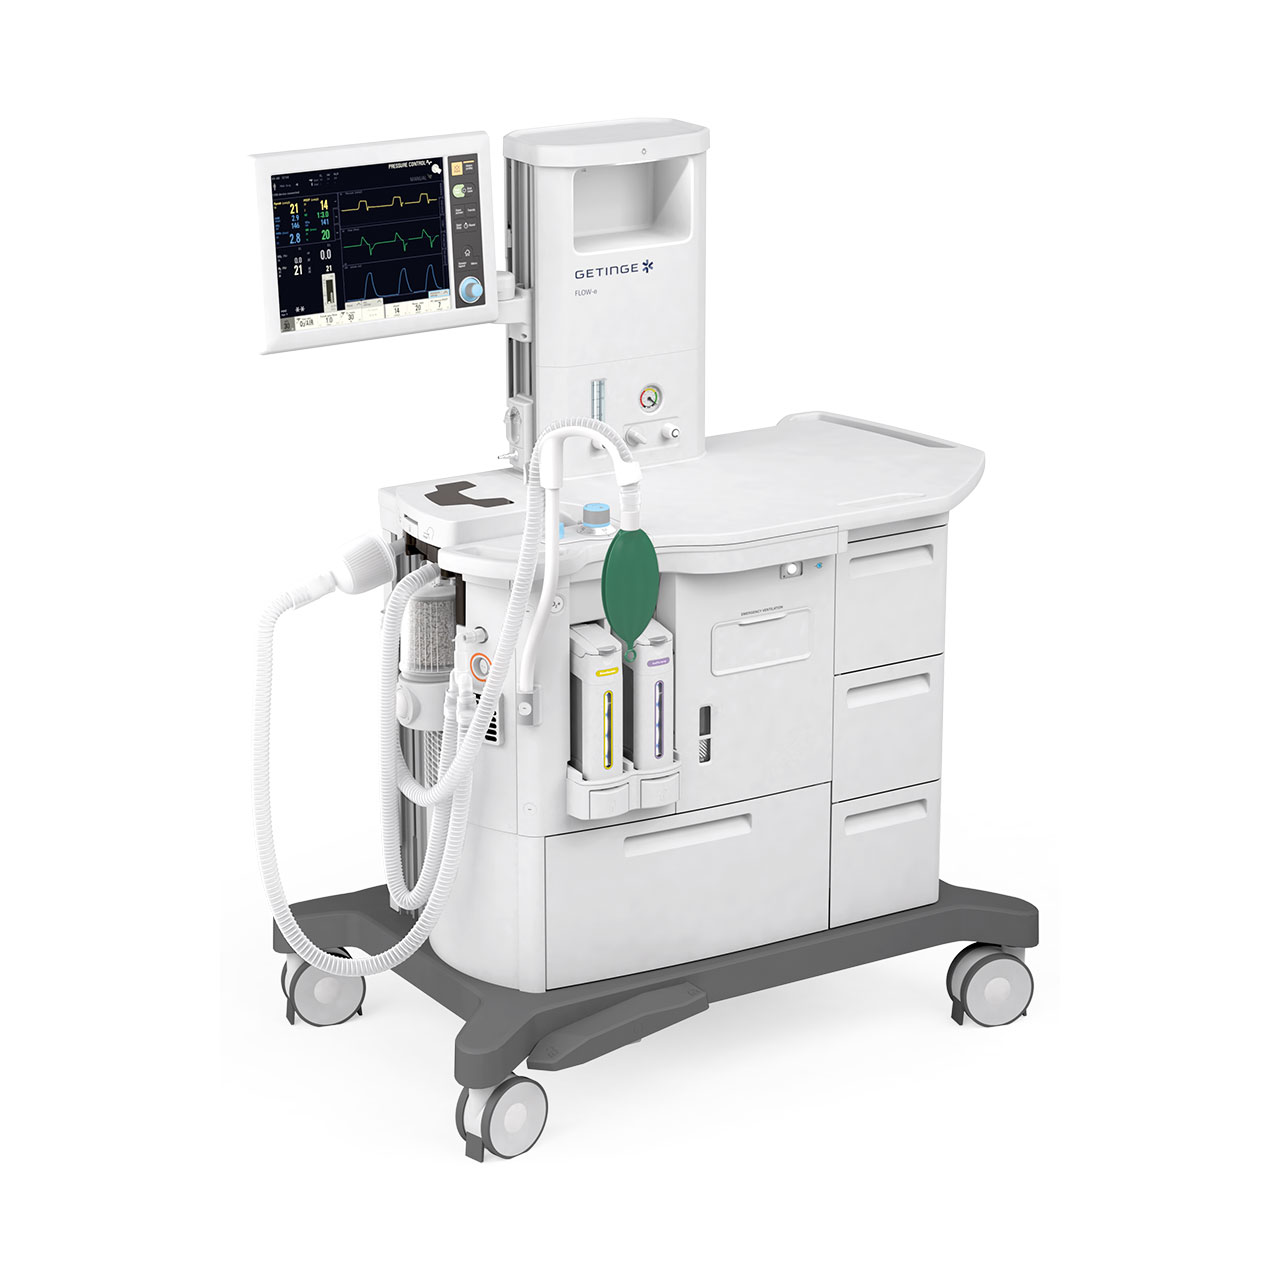 Getinge Flow-e anesthesia machine is our extended model for a streamlined workflow in the OR